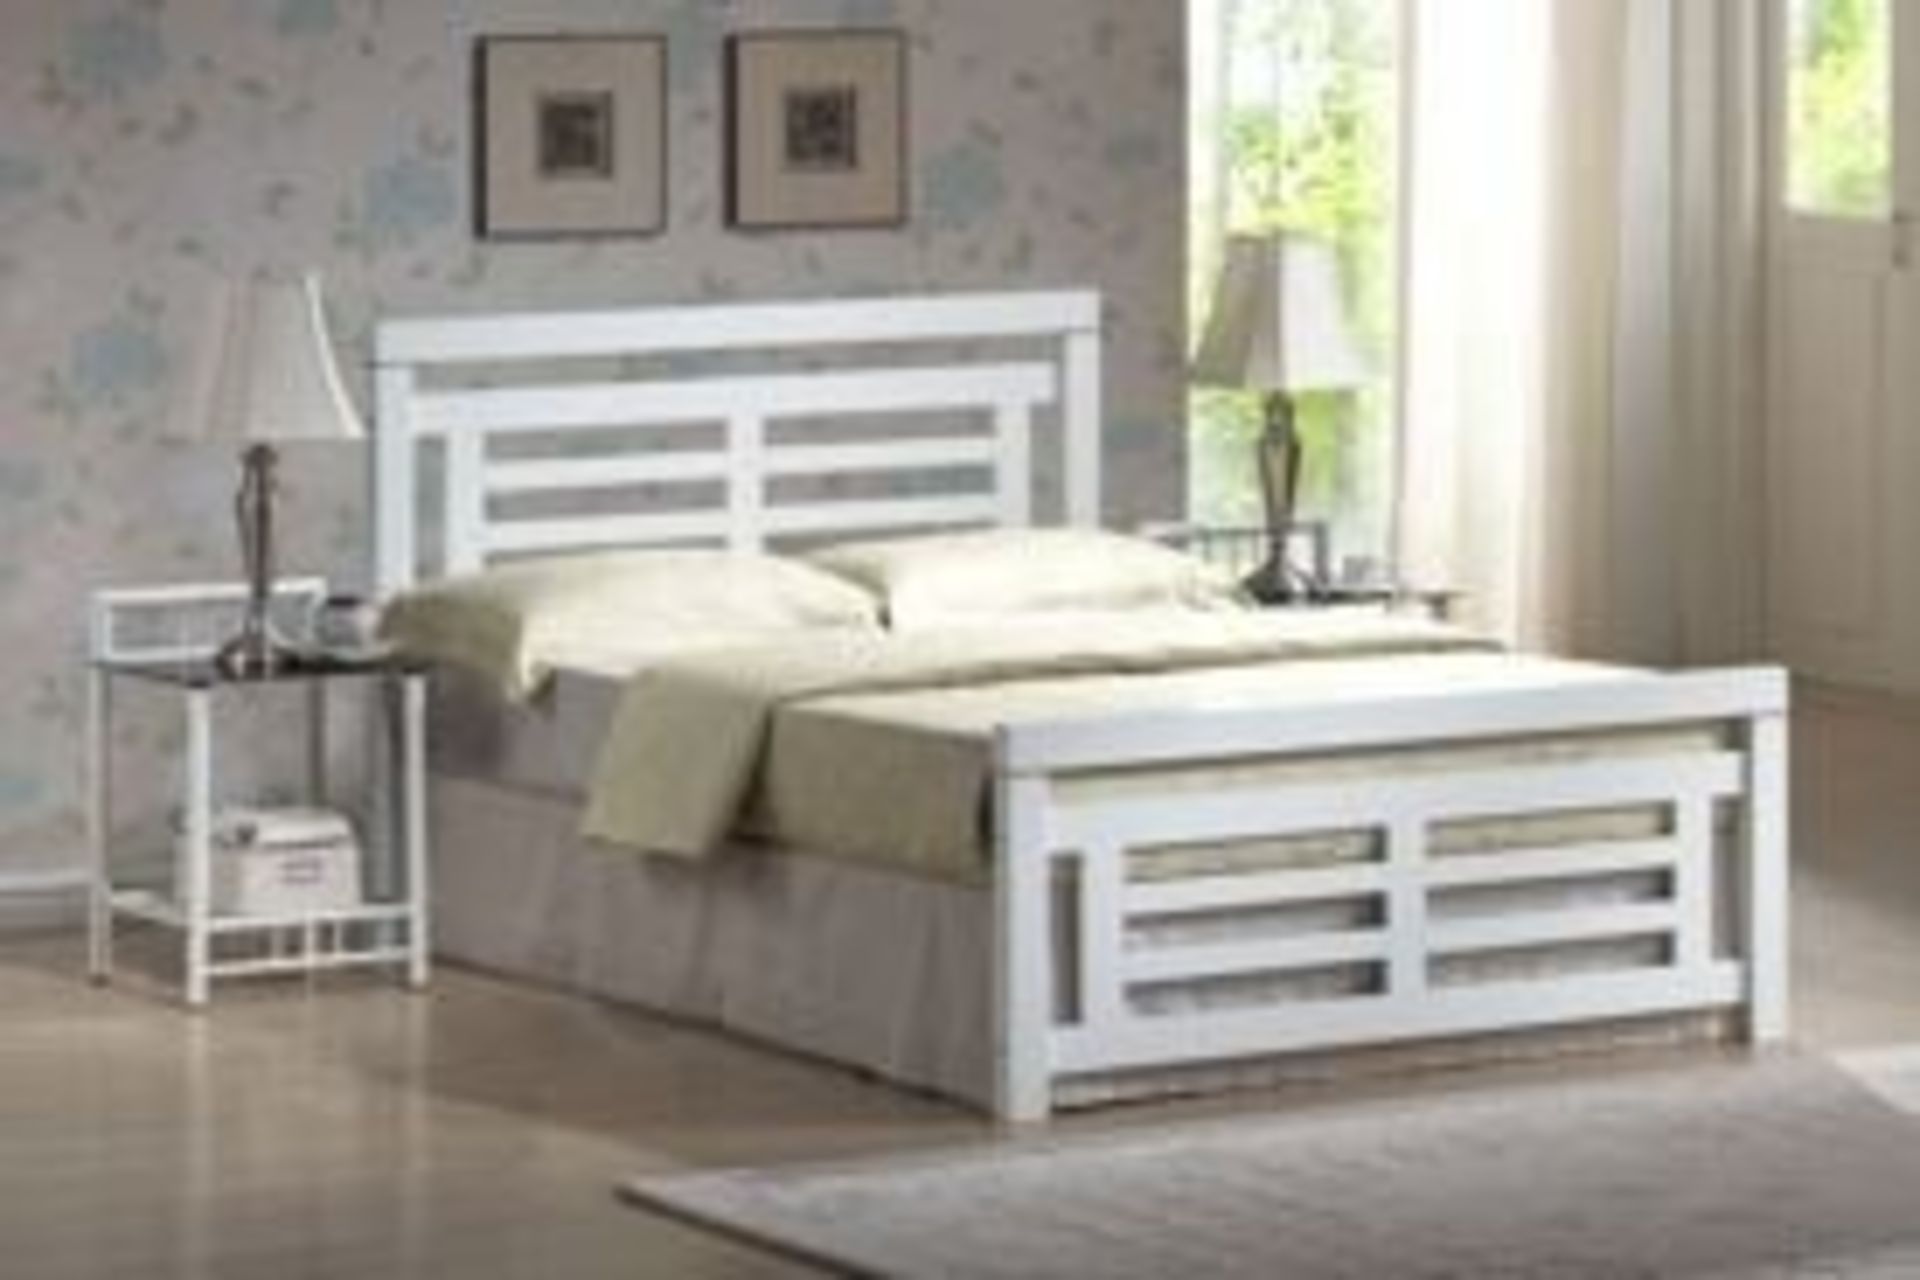 Brand New and Boxed King-size Colorado Bed (White)RRP £349